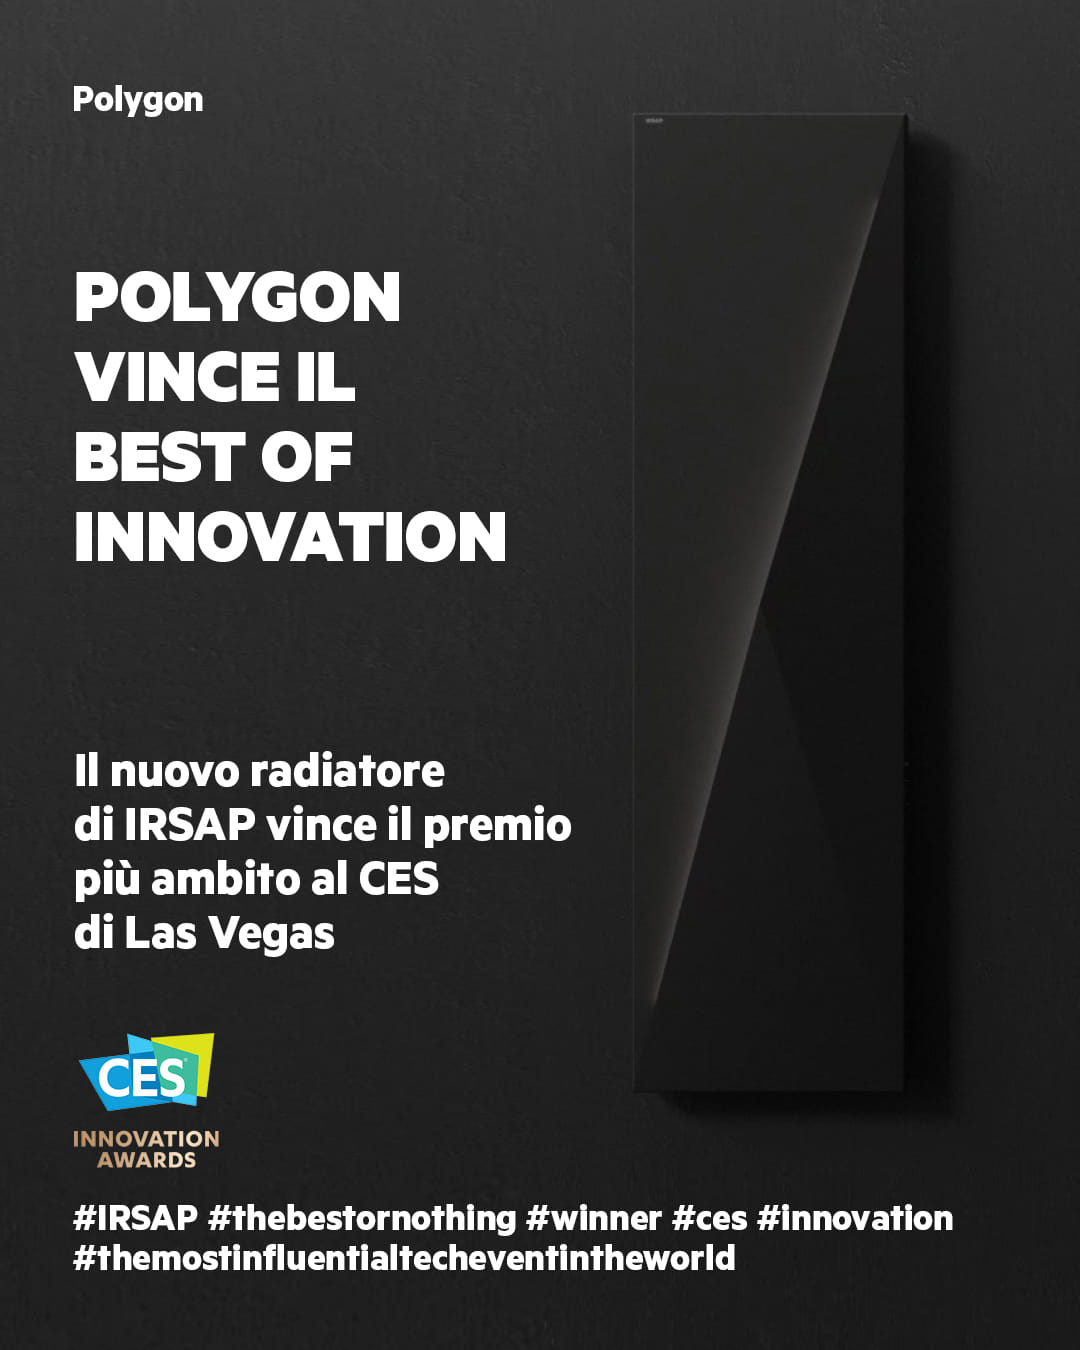 POLYGON WINS BEST OF INNOVATION AT CES IN LAS VEGAS